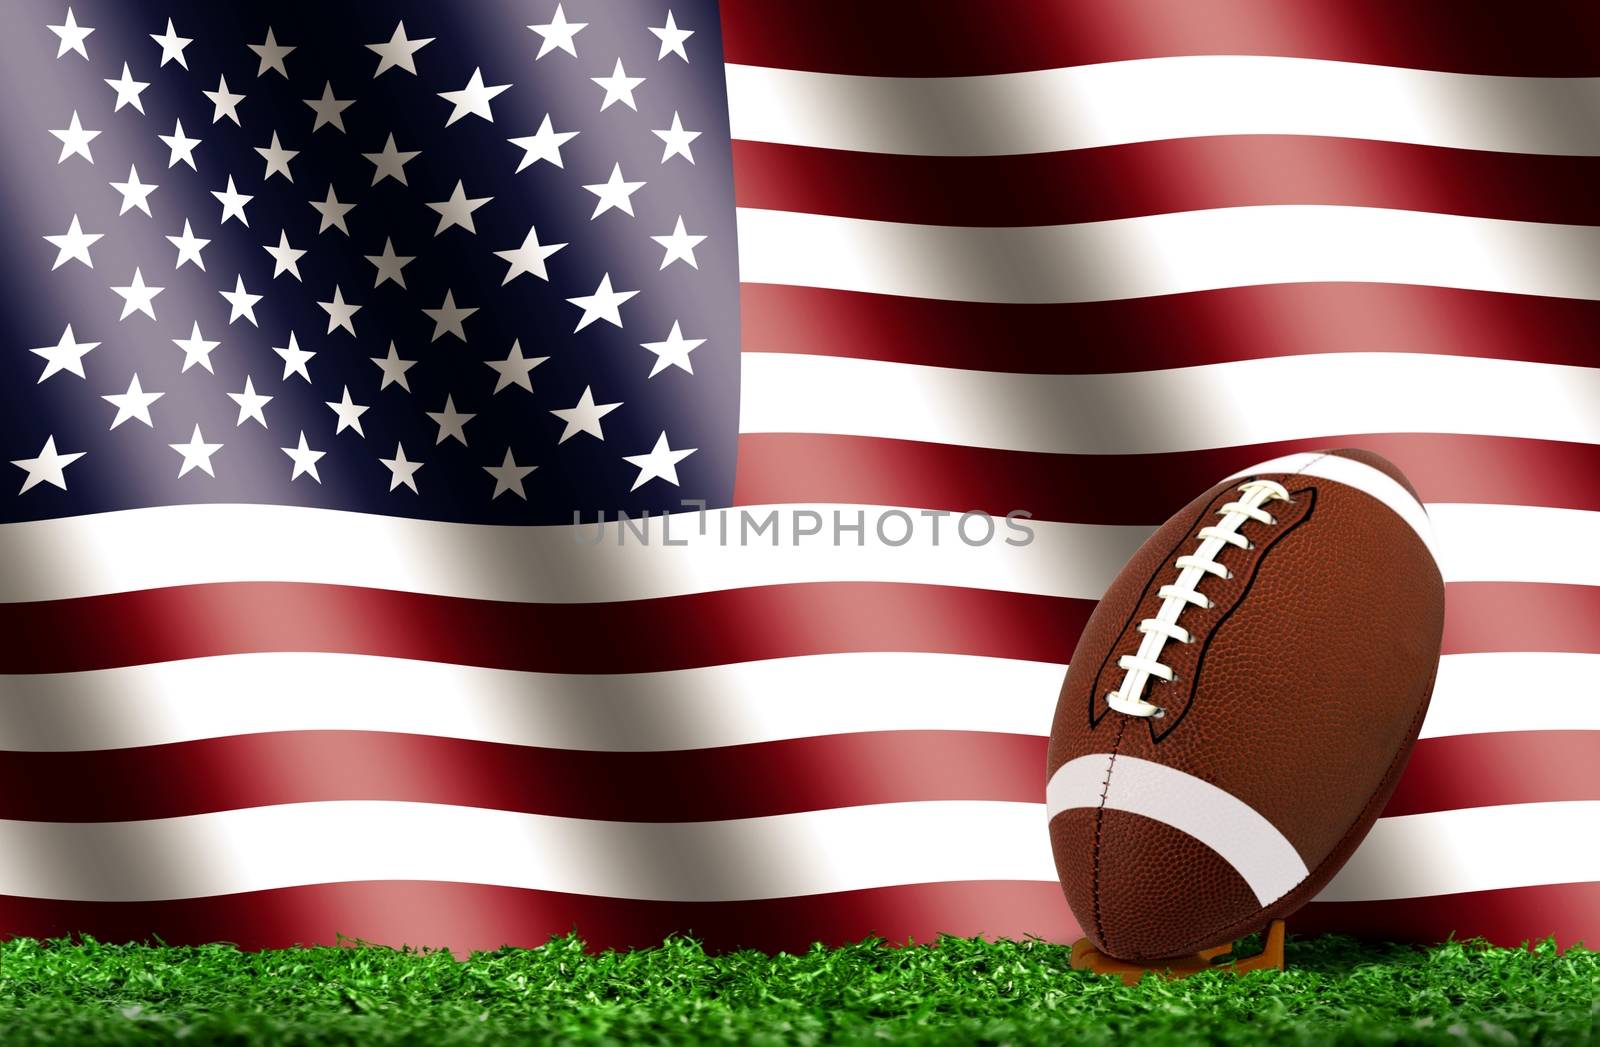 Football Ball on Grass with American Flag by razihusin